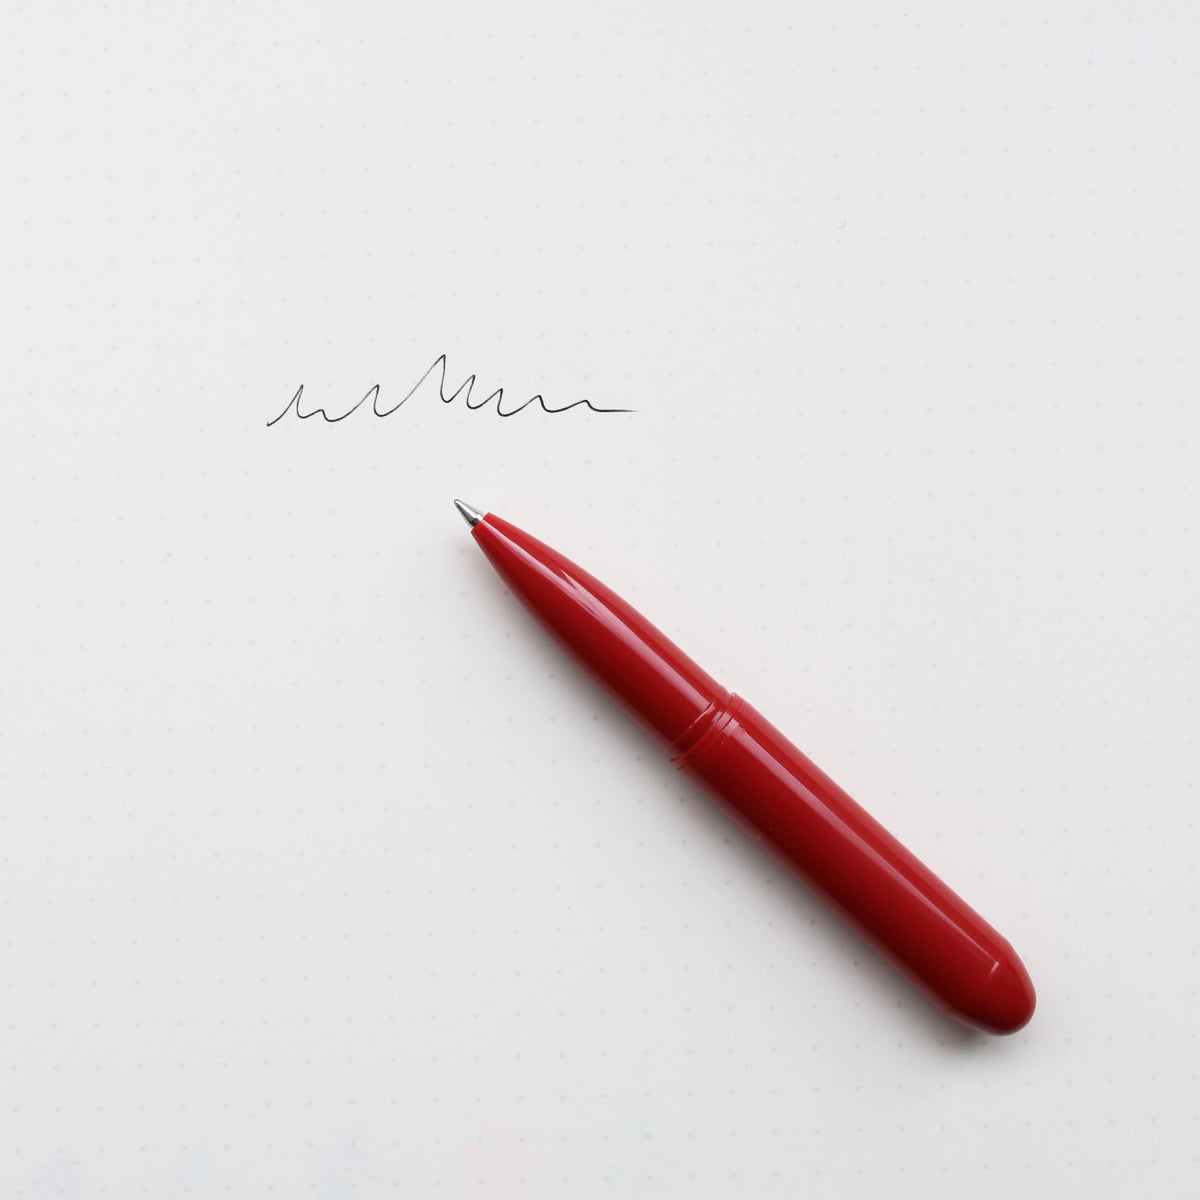 products/Penco_BulletballpointPen_Red_02.jpg